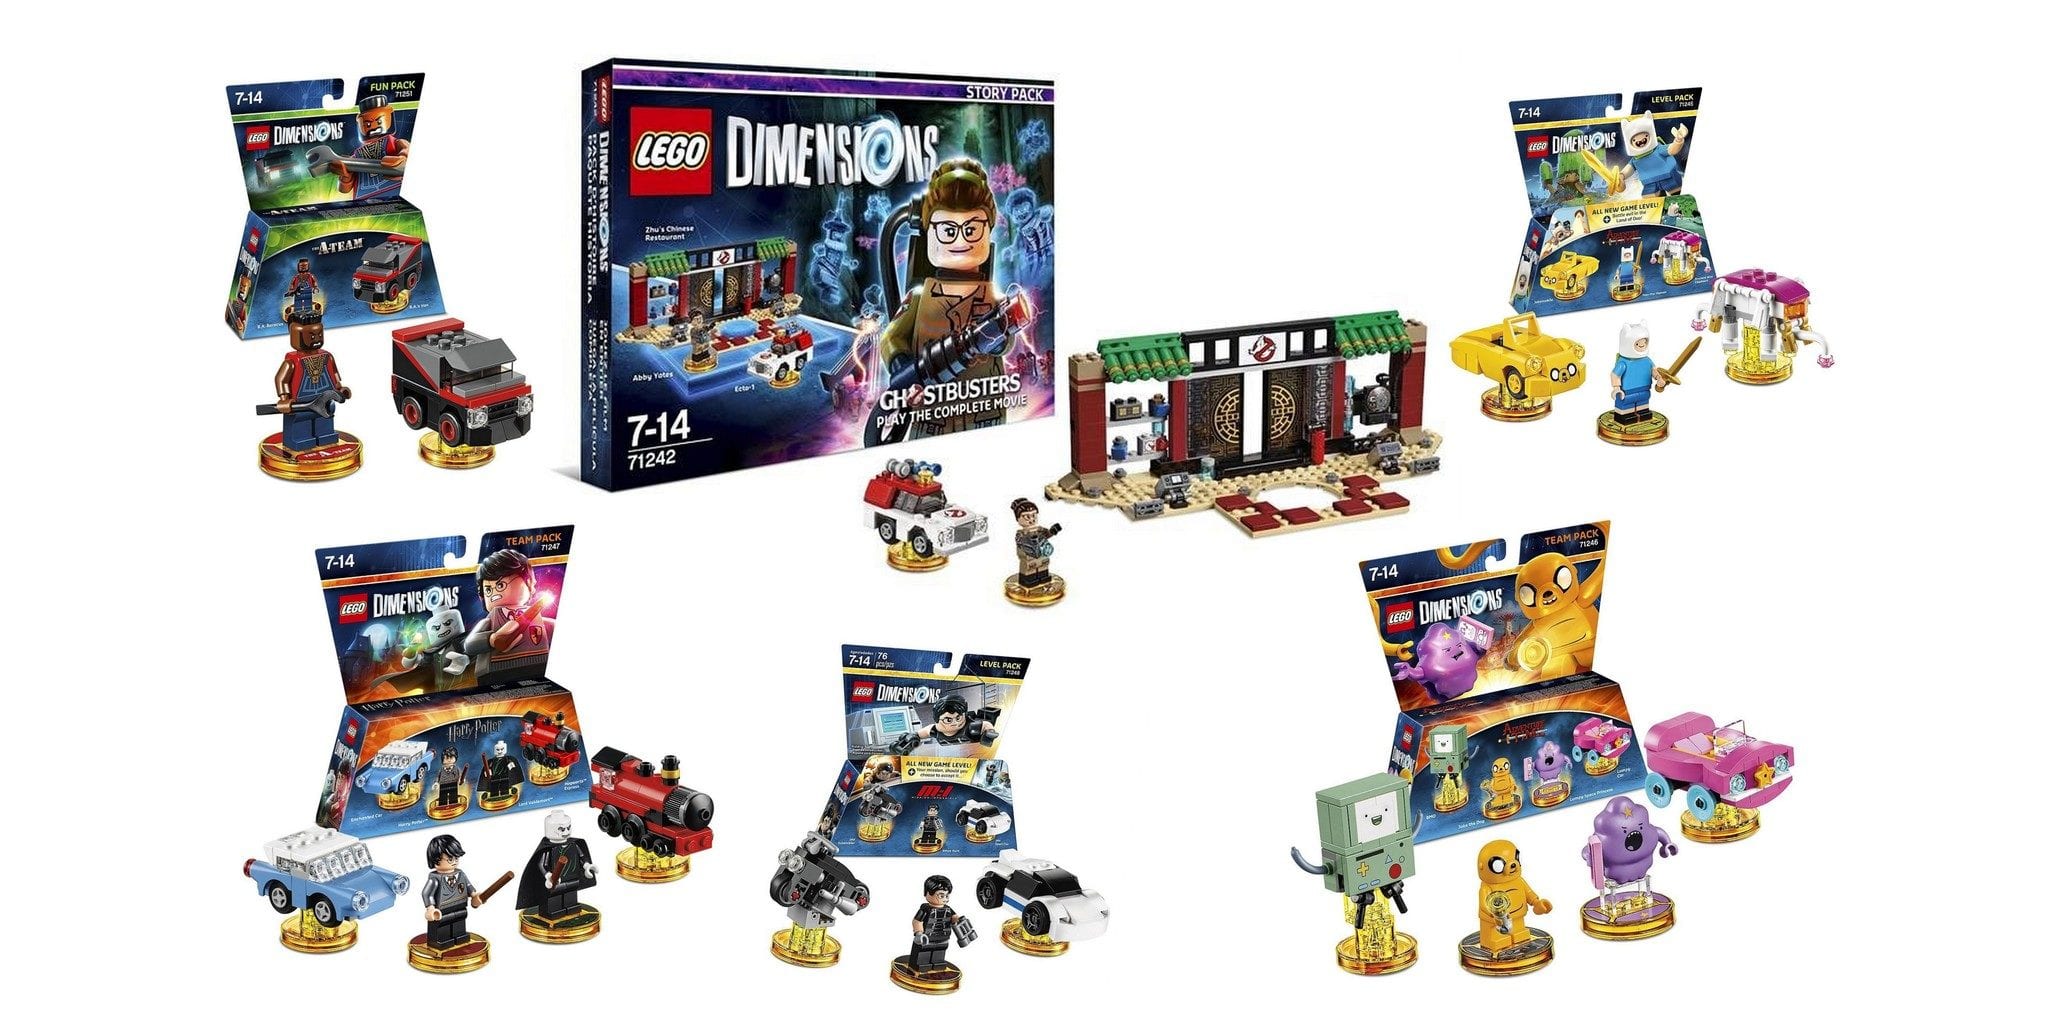 LEGO wave 6 - Ghostbusters, Potter, Adventure more